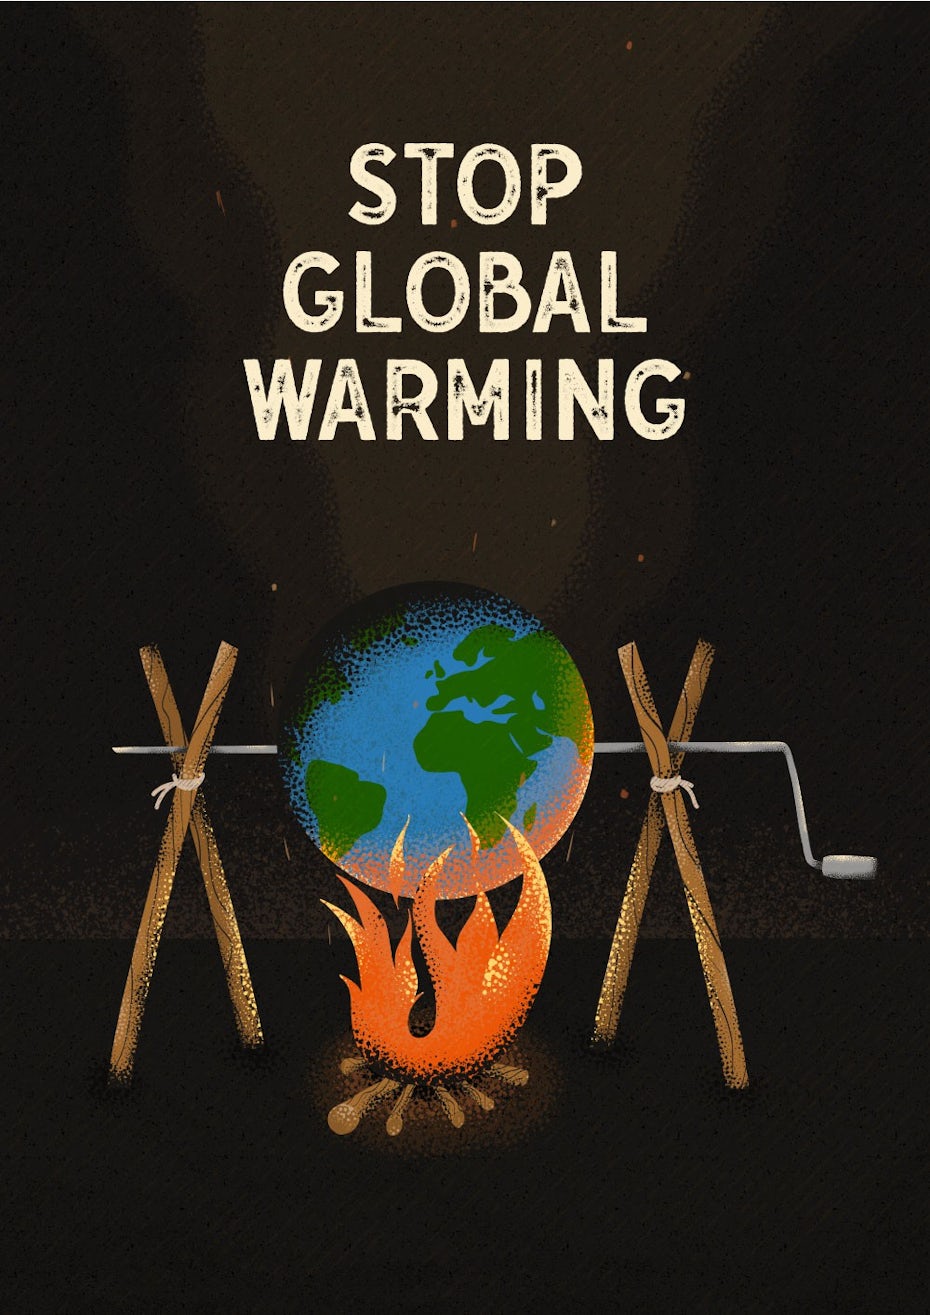 Graphic design poster protesting climate change